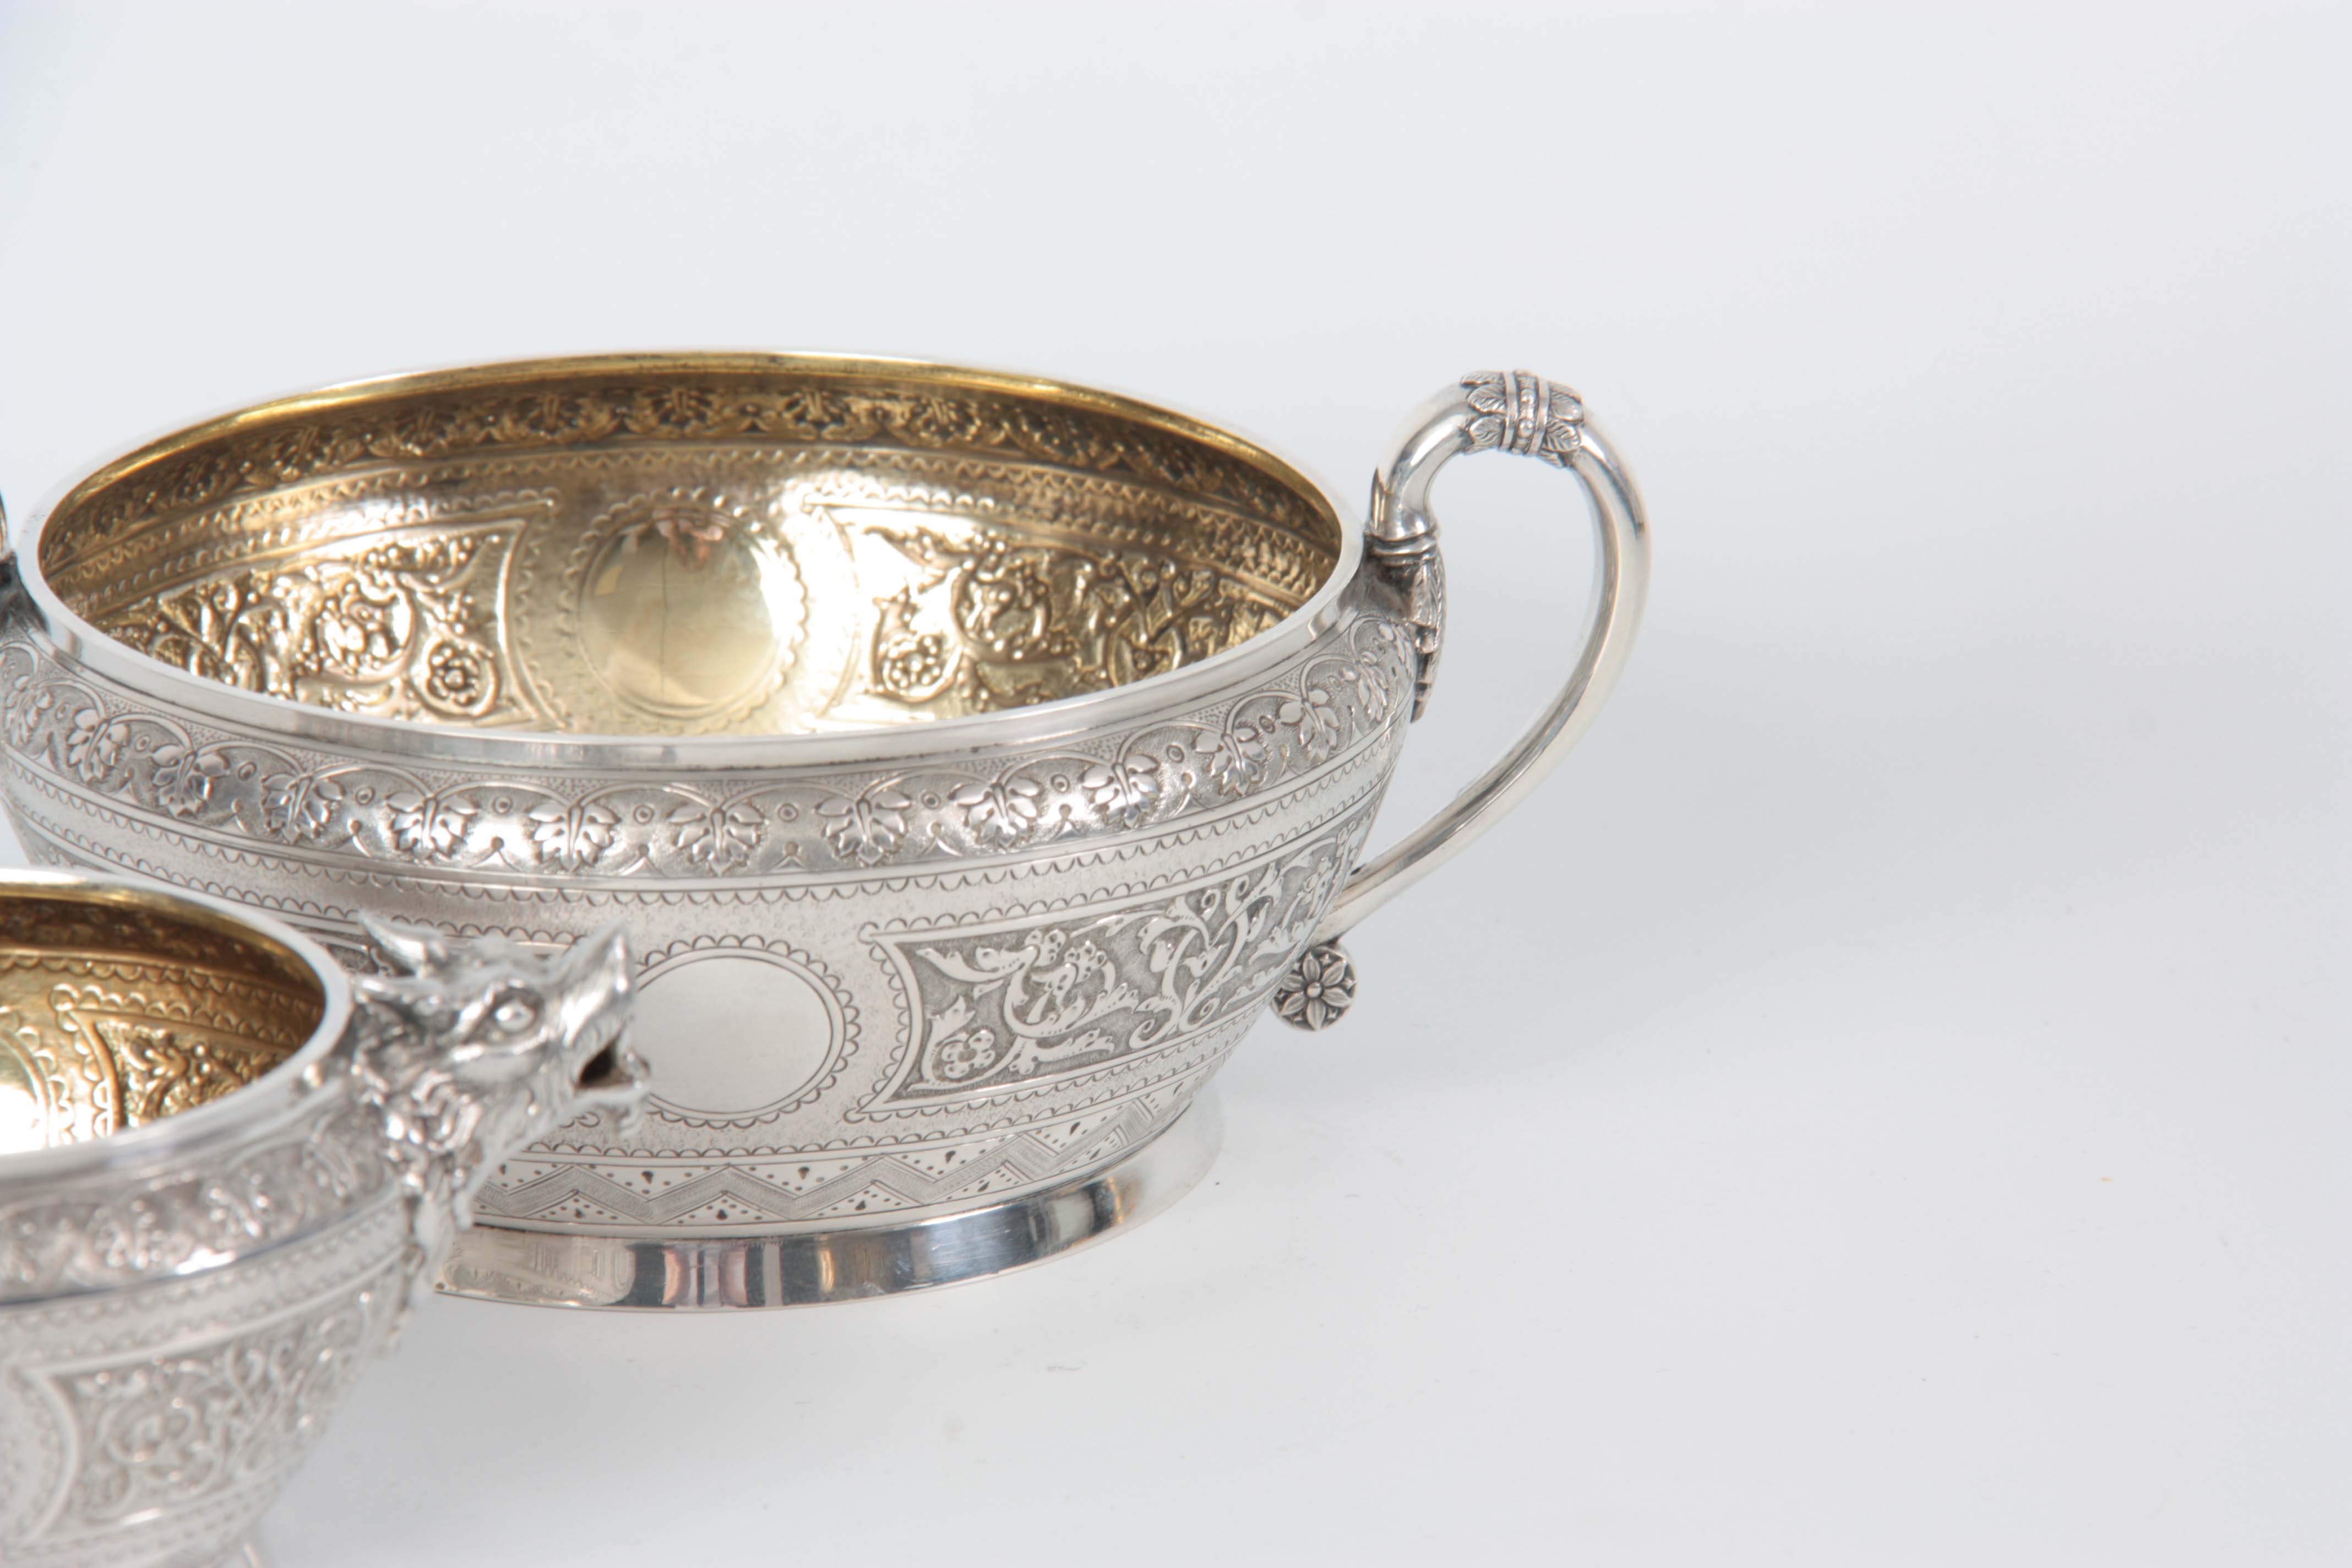 A VICTORIAN SILVER AND GILT CREAM JUG AND SUGAR BOWL having relief scroll-work panels and fine - Image 4 of 7